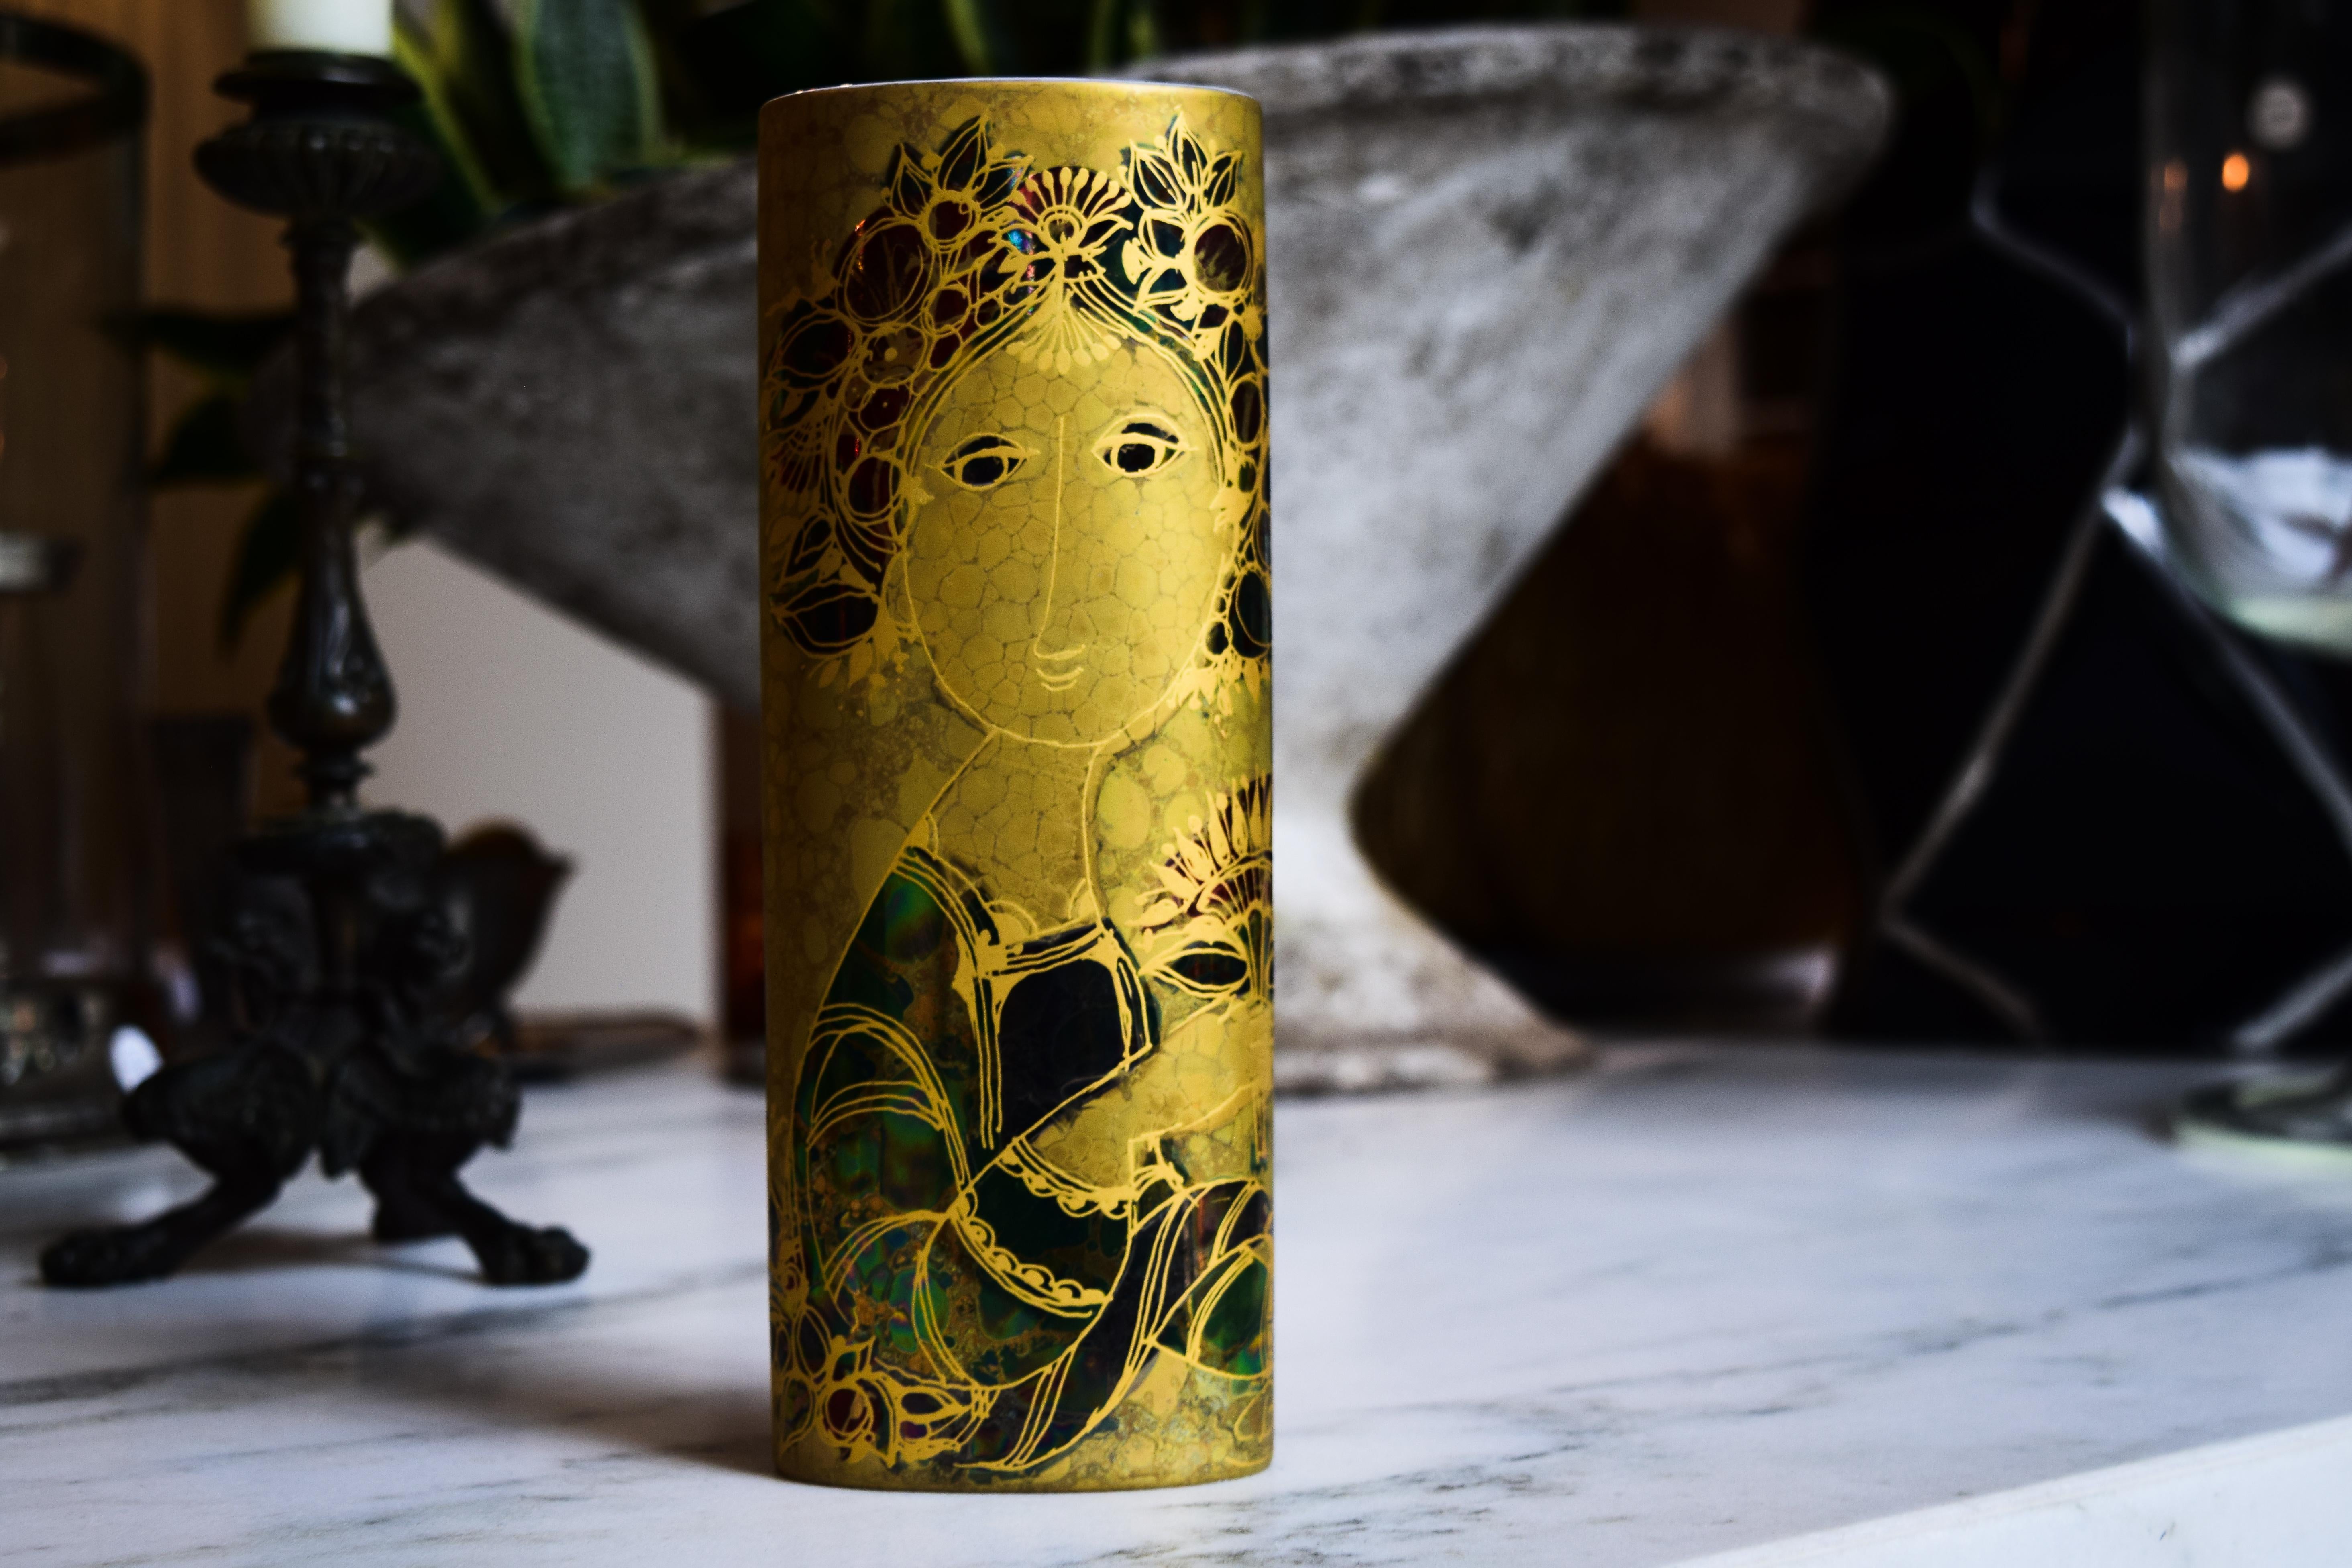 This vase is one example of the captivating style brought to life by the whimsical mind of artist Bjorn Wiinblad. Delightfully colored in metallics and 24-karat gold, the vases feature the trademark round faces and complex detail that made Wiinblad